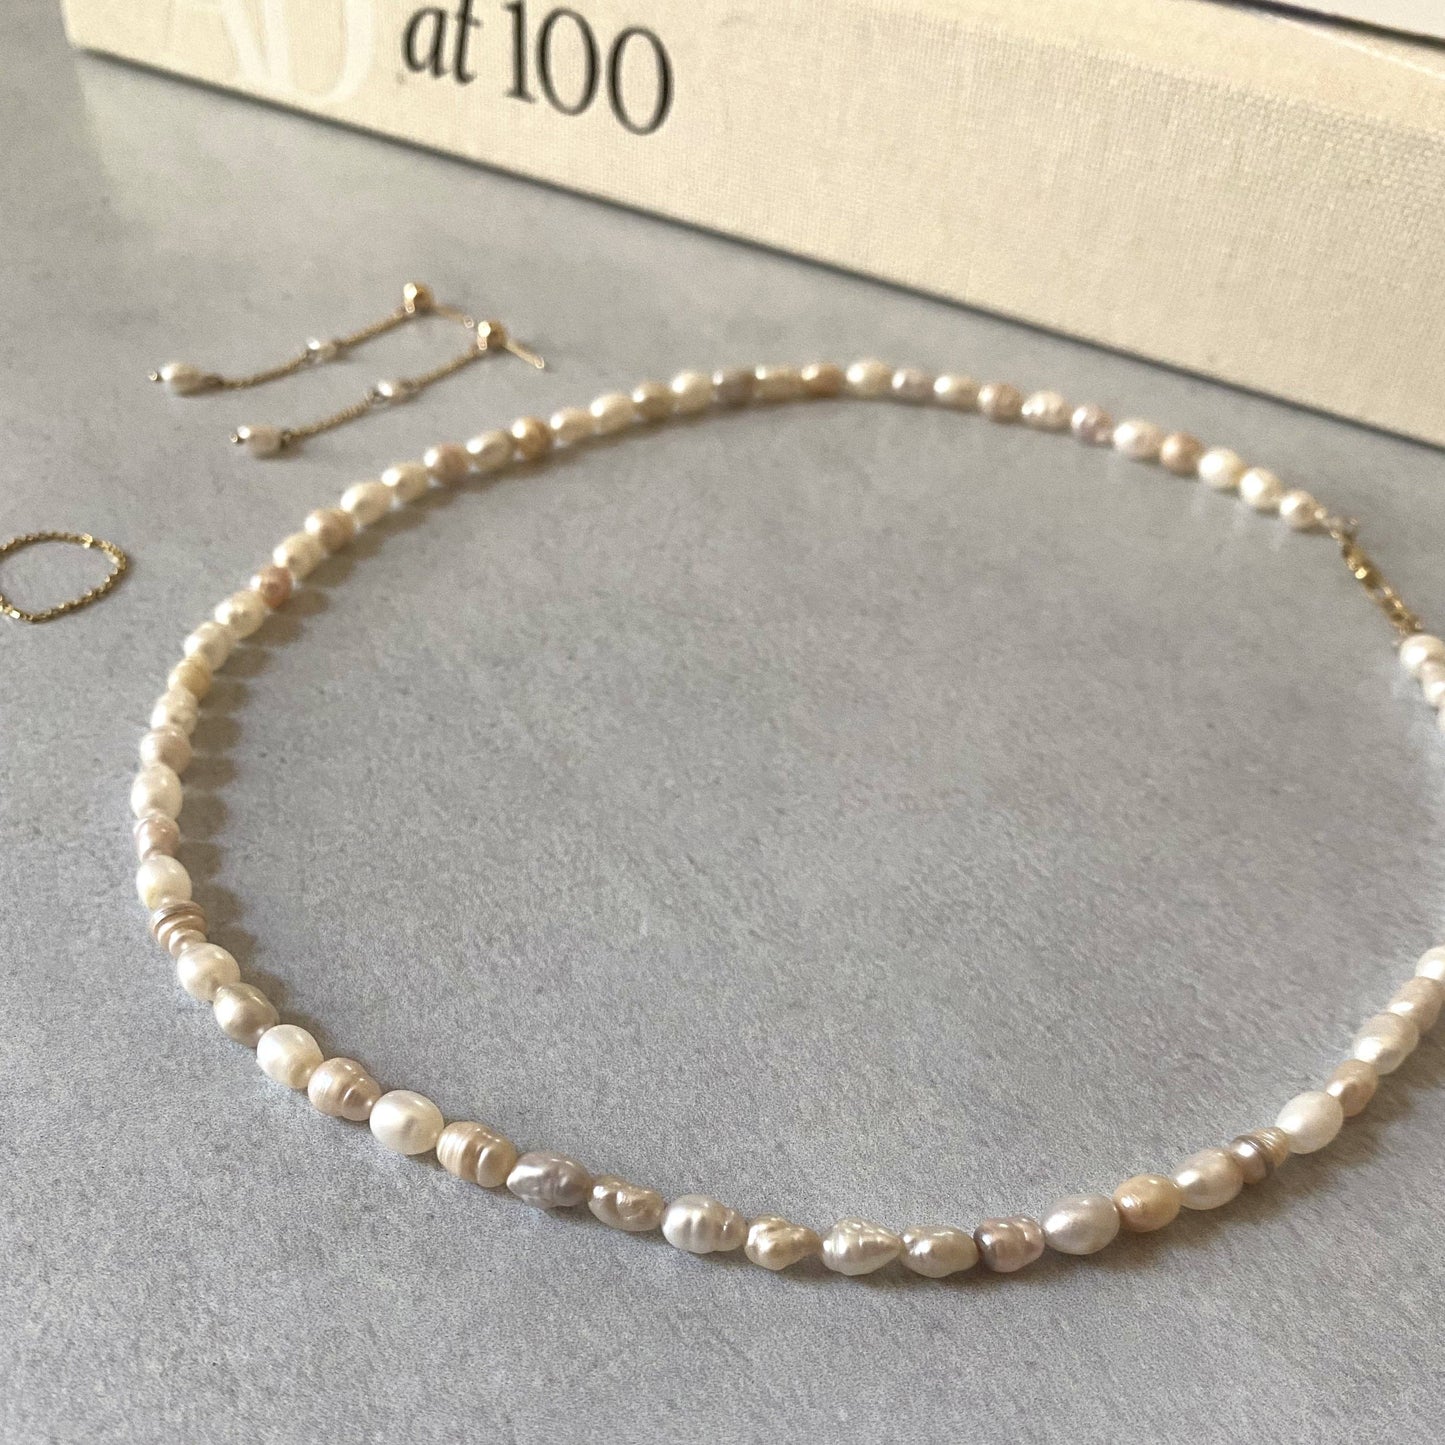 14k Biwa Freshwater Pearl Necklace: Yellow 14k Solid Gold / 16 inches